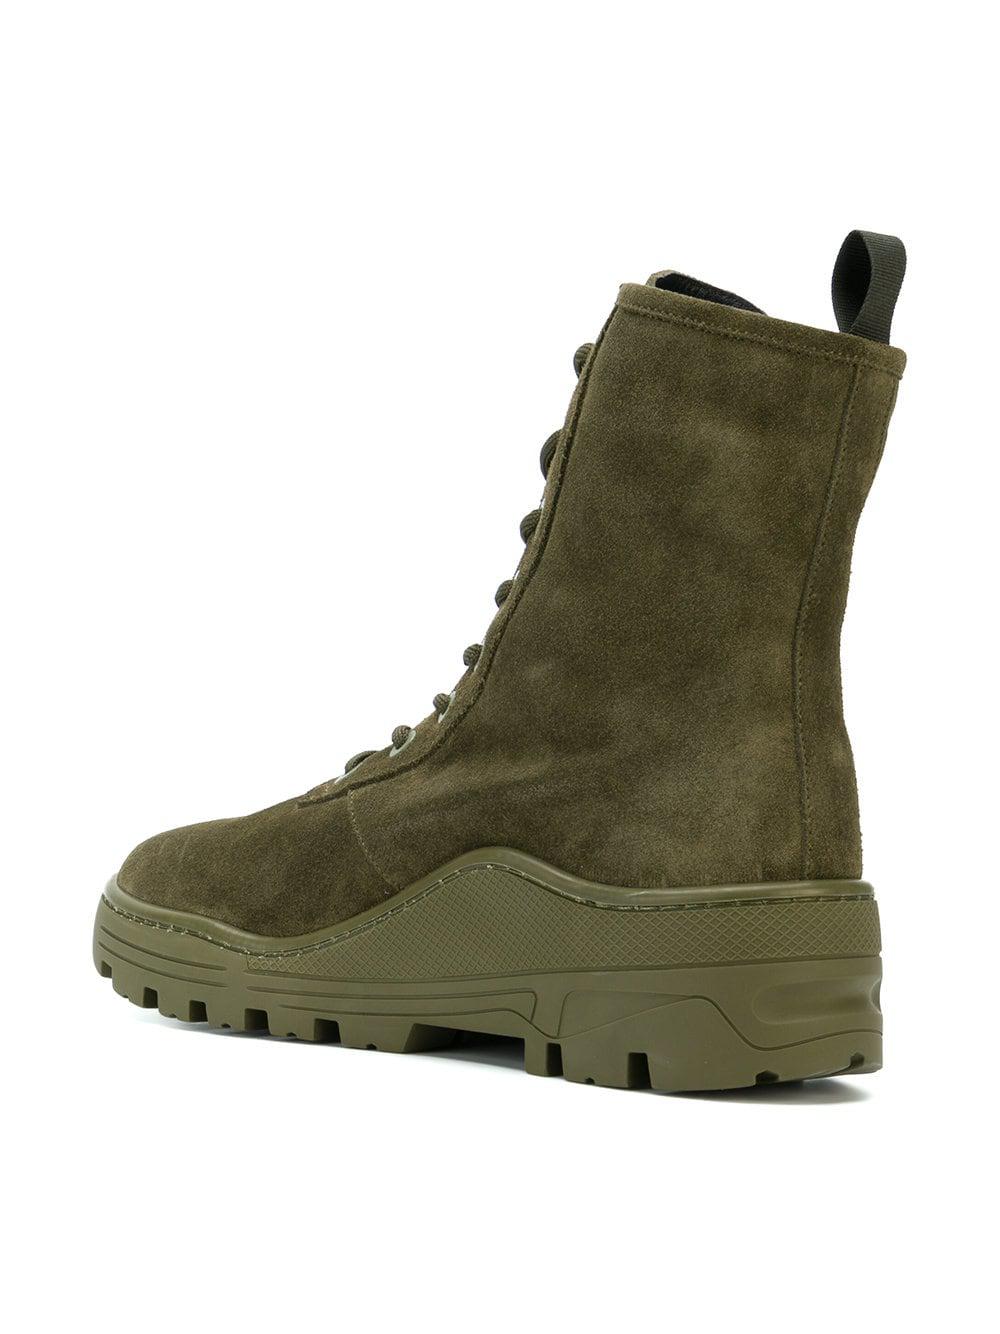 yeezy boots green